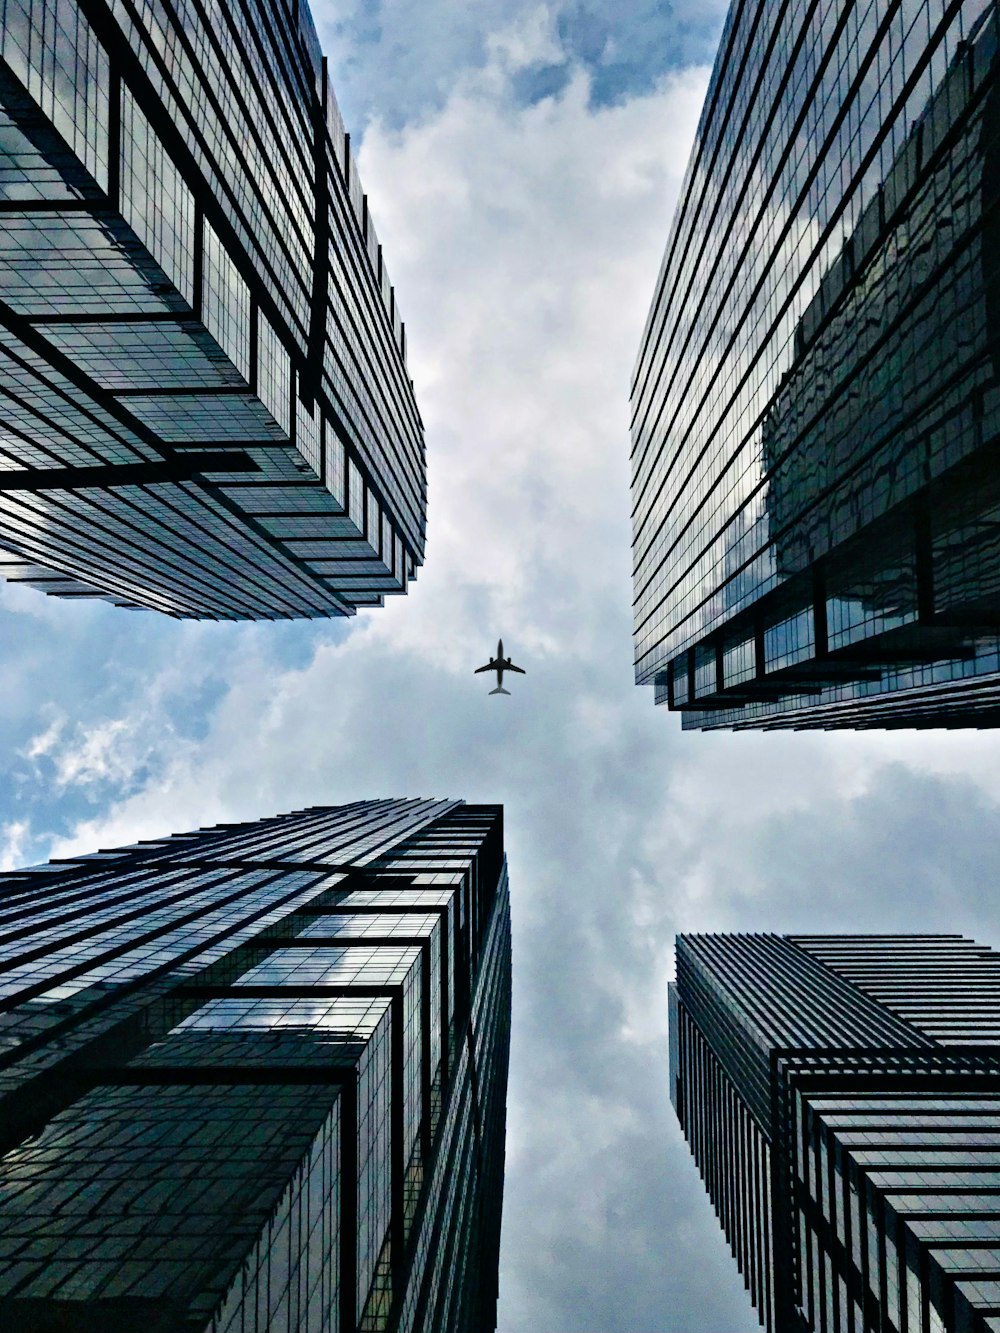 airplane flying over the high rise building during daytime